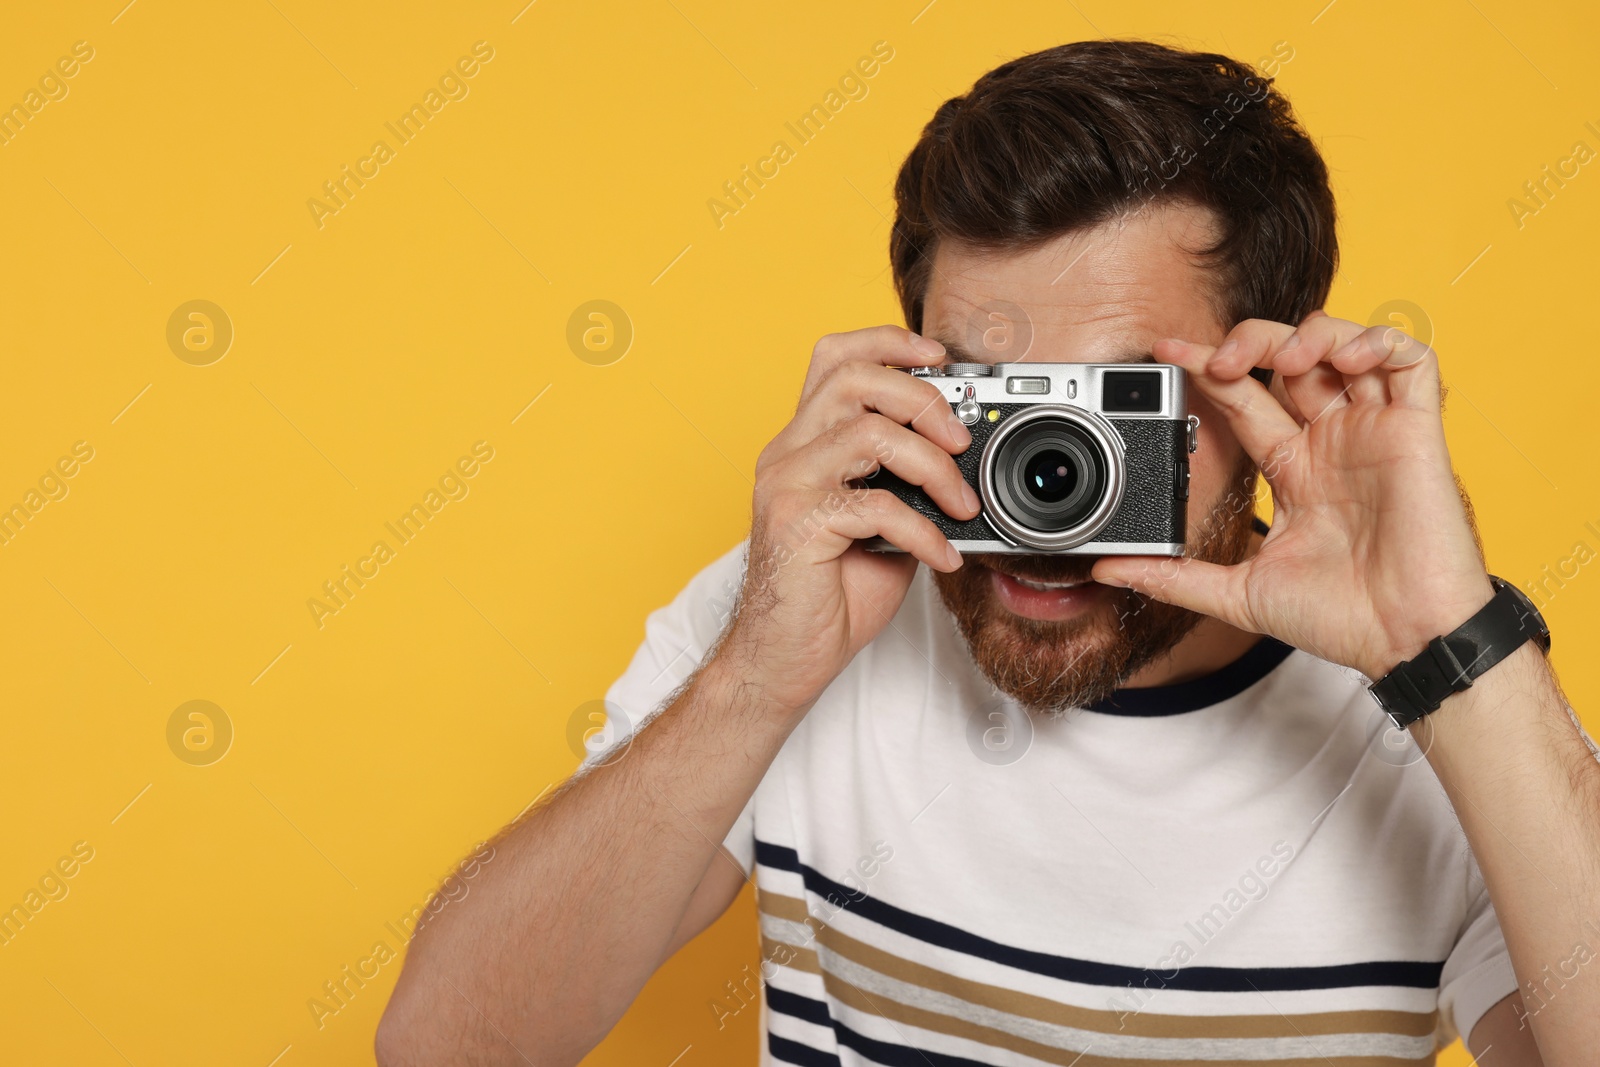 Photo of Man with camera taking photo on yellow background, space for text. Interesting hobby